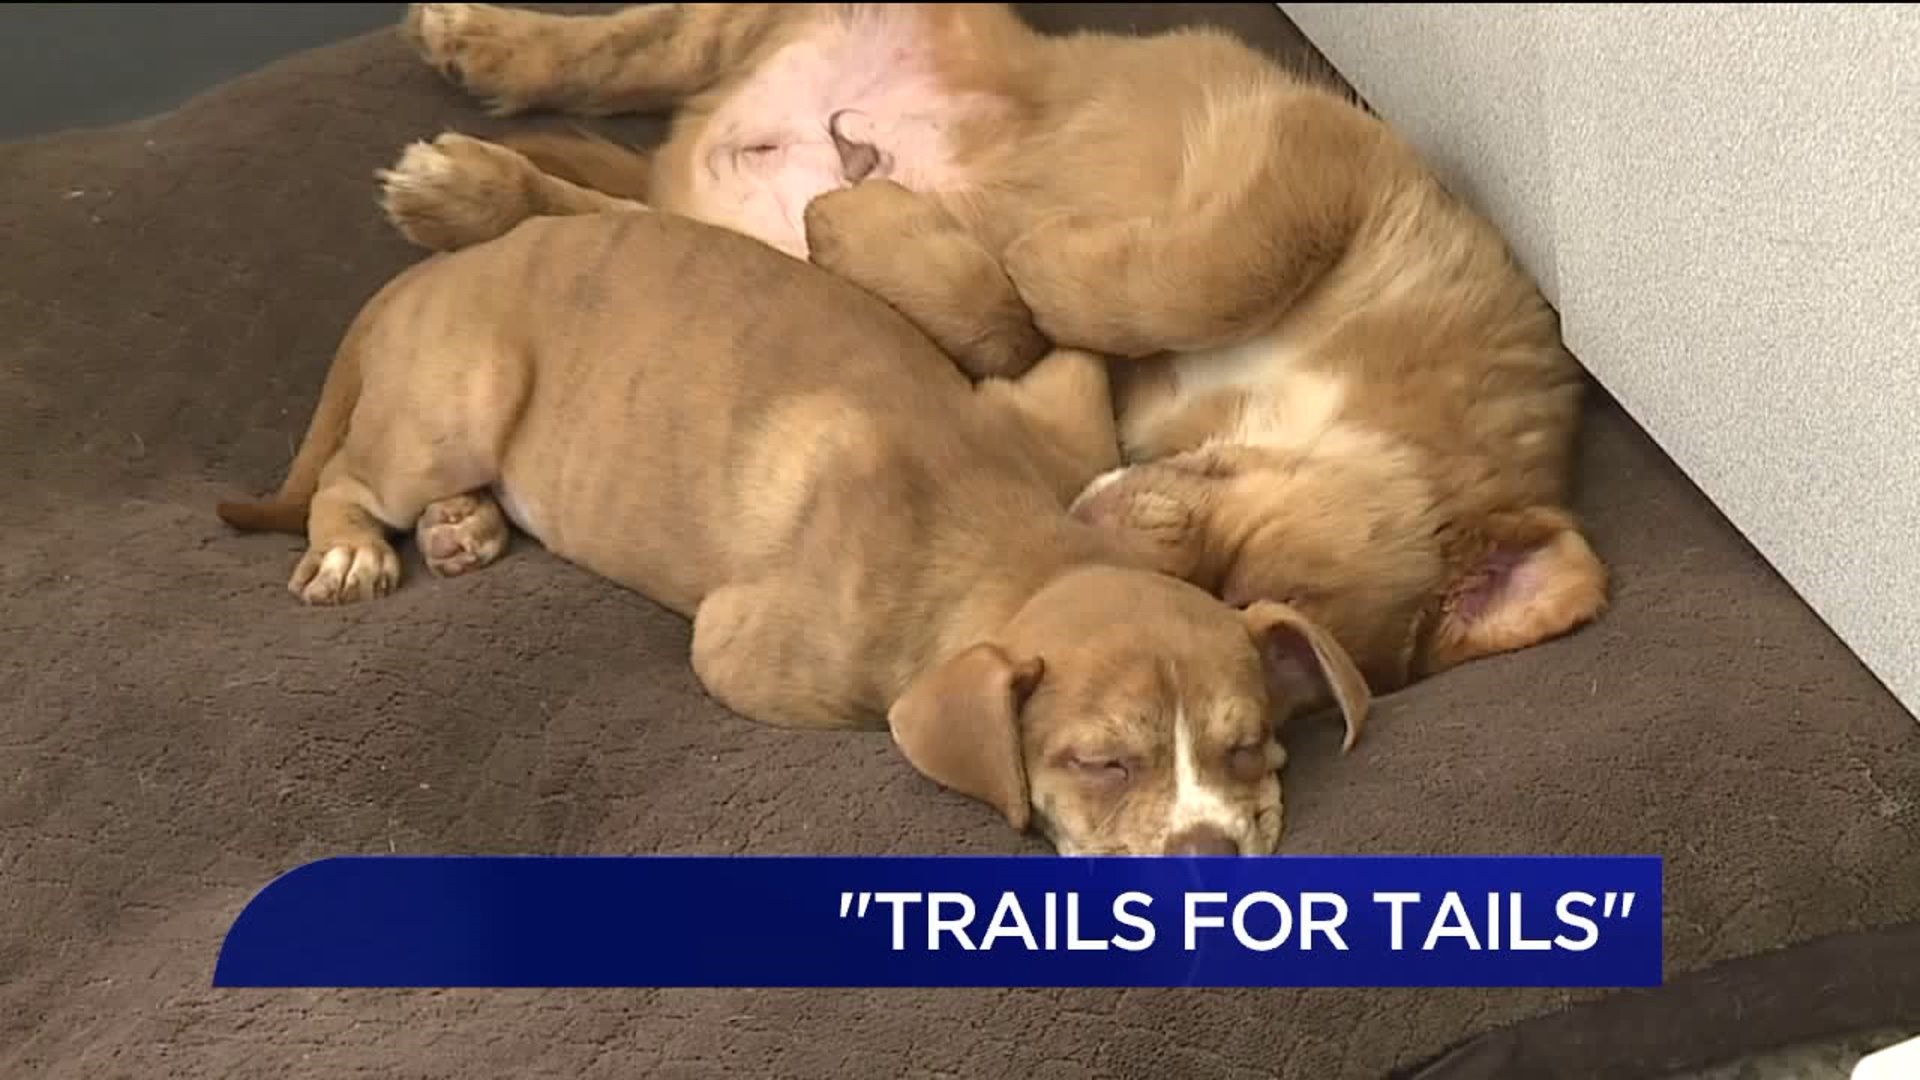 Trails for Tails Fundraiser